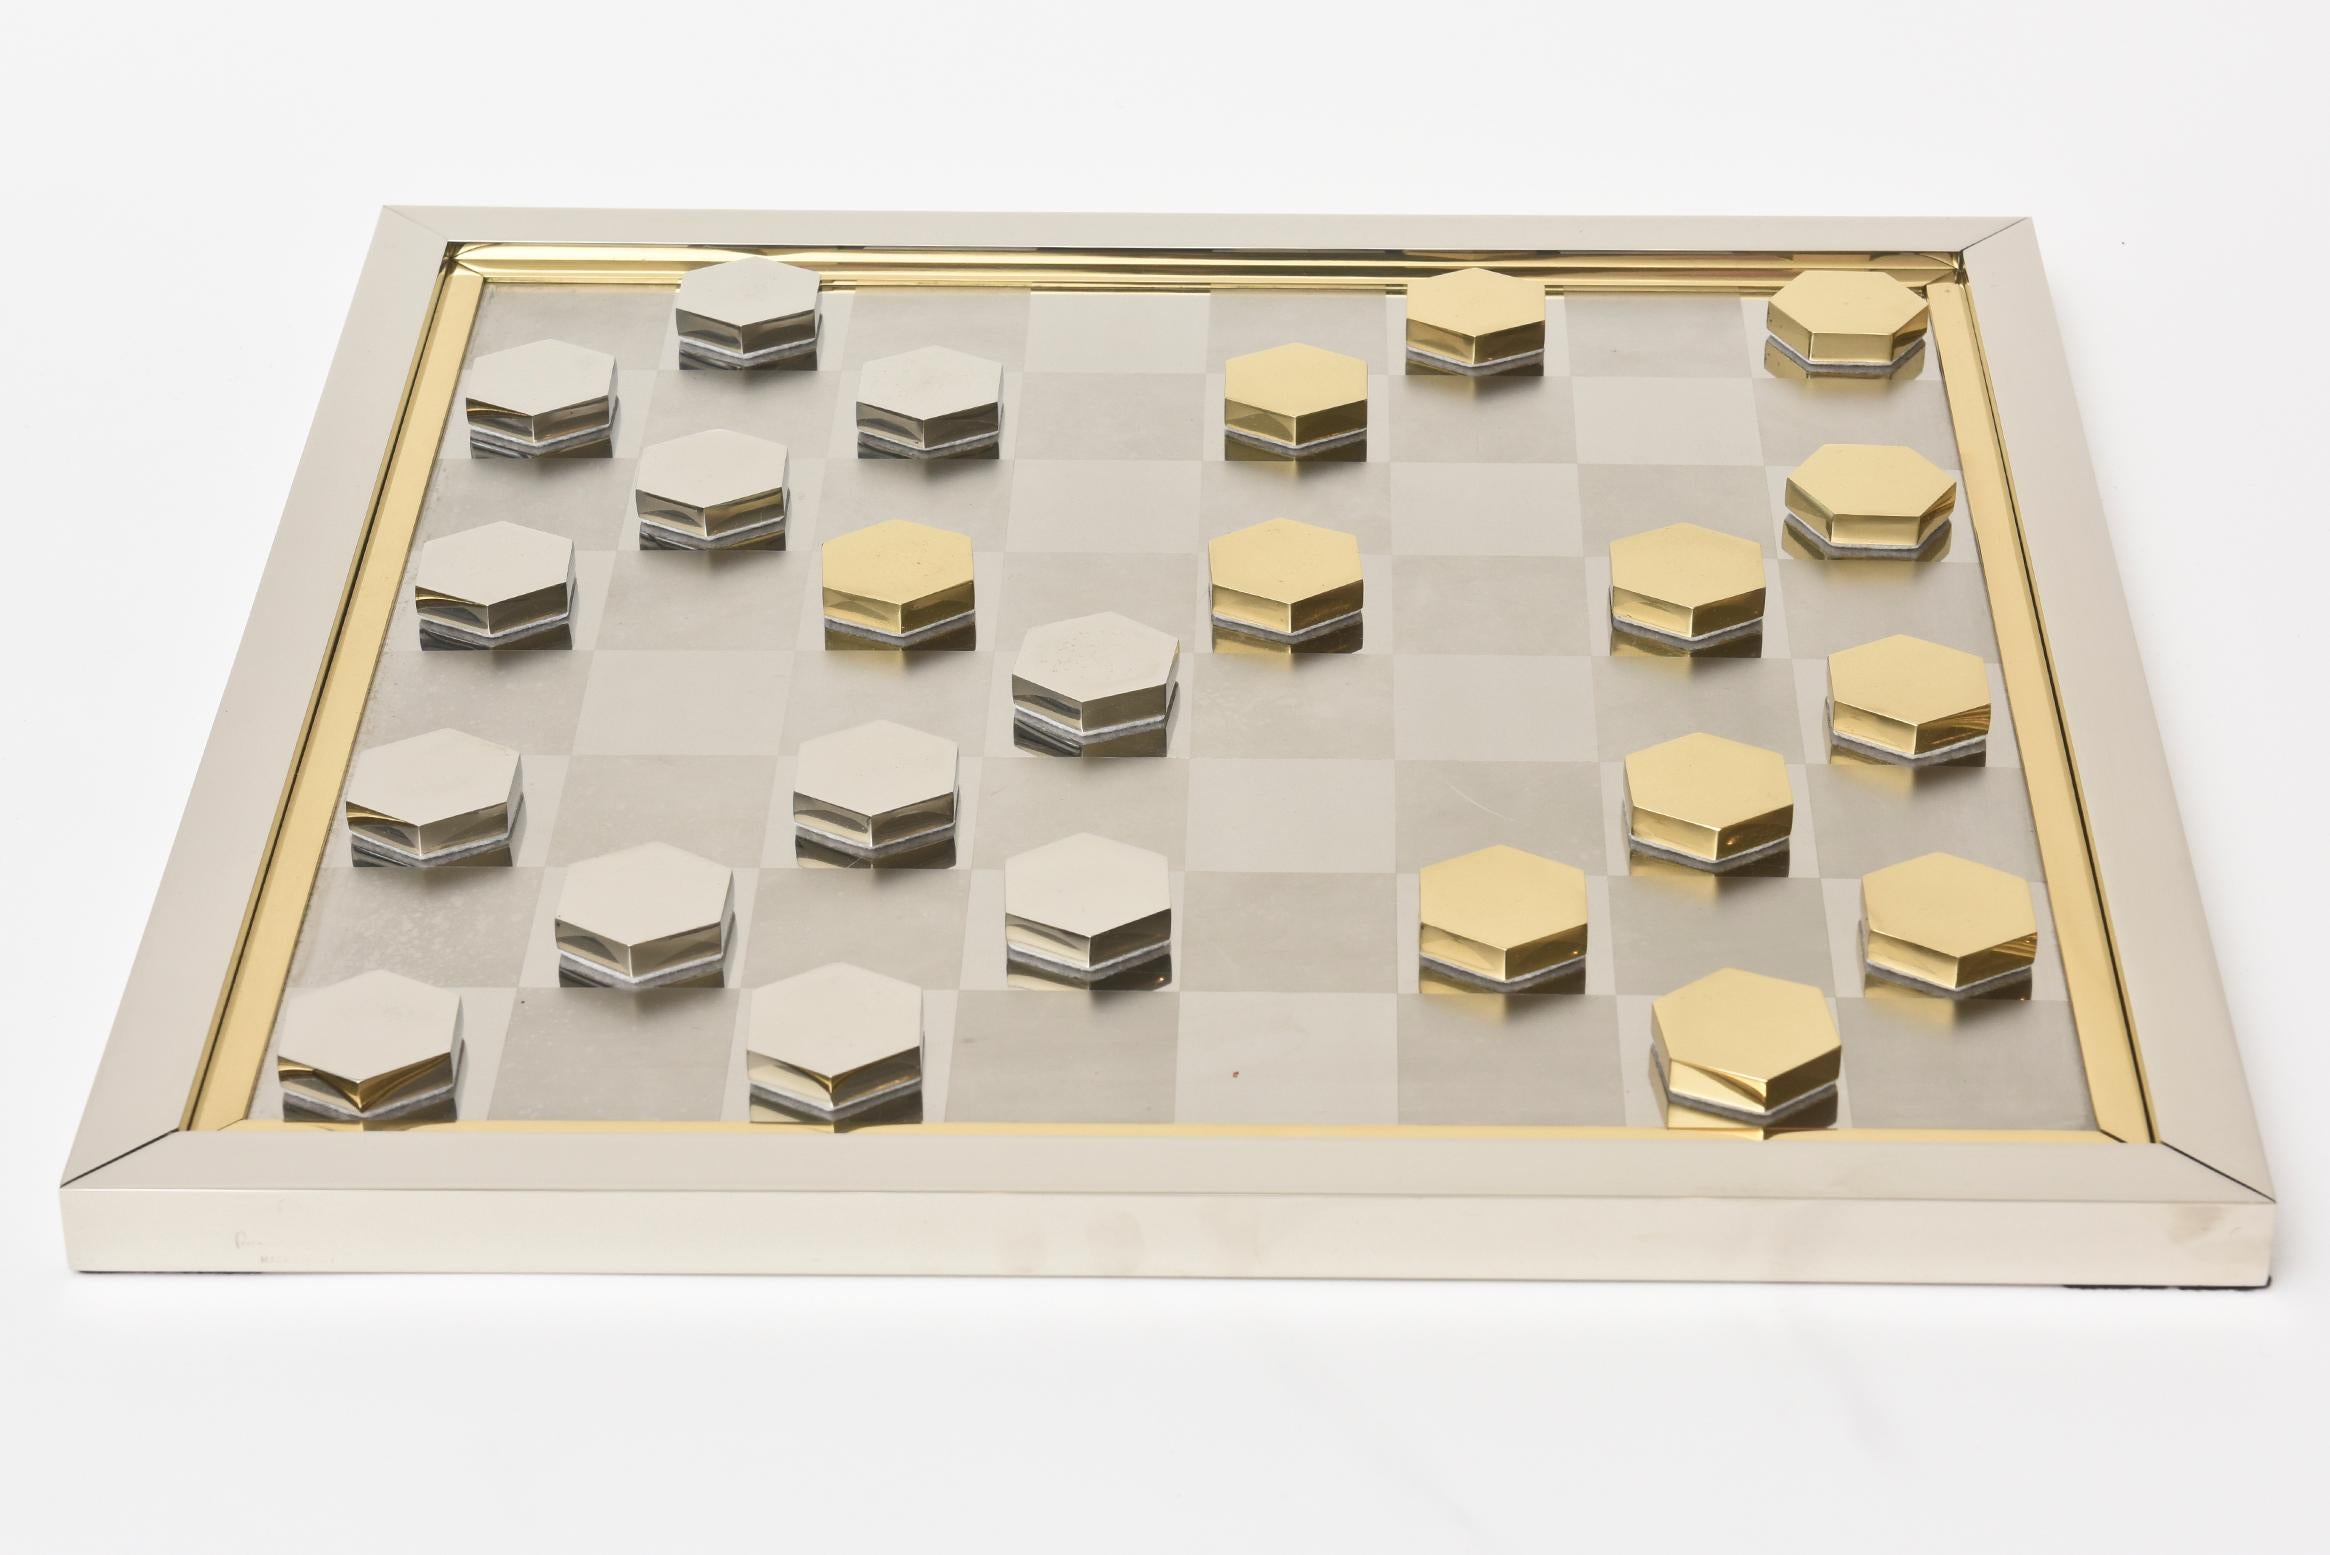 Romeo Rega Signed Brass and Chrome-Plated Checkers Game, Italian Vintage For Sale 2